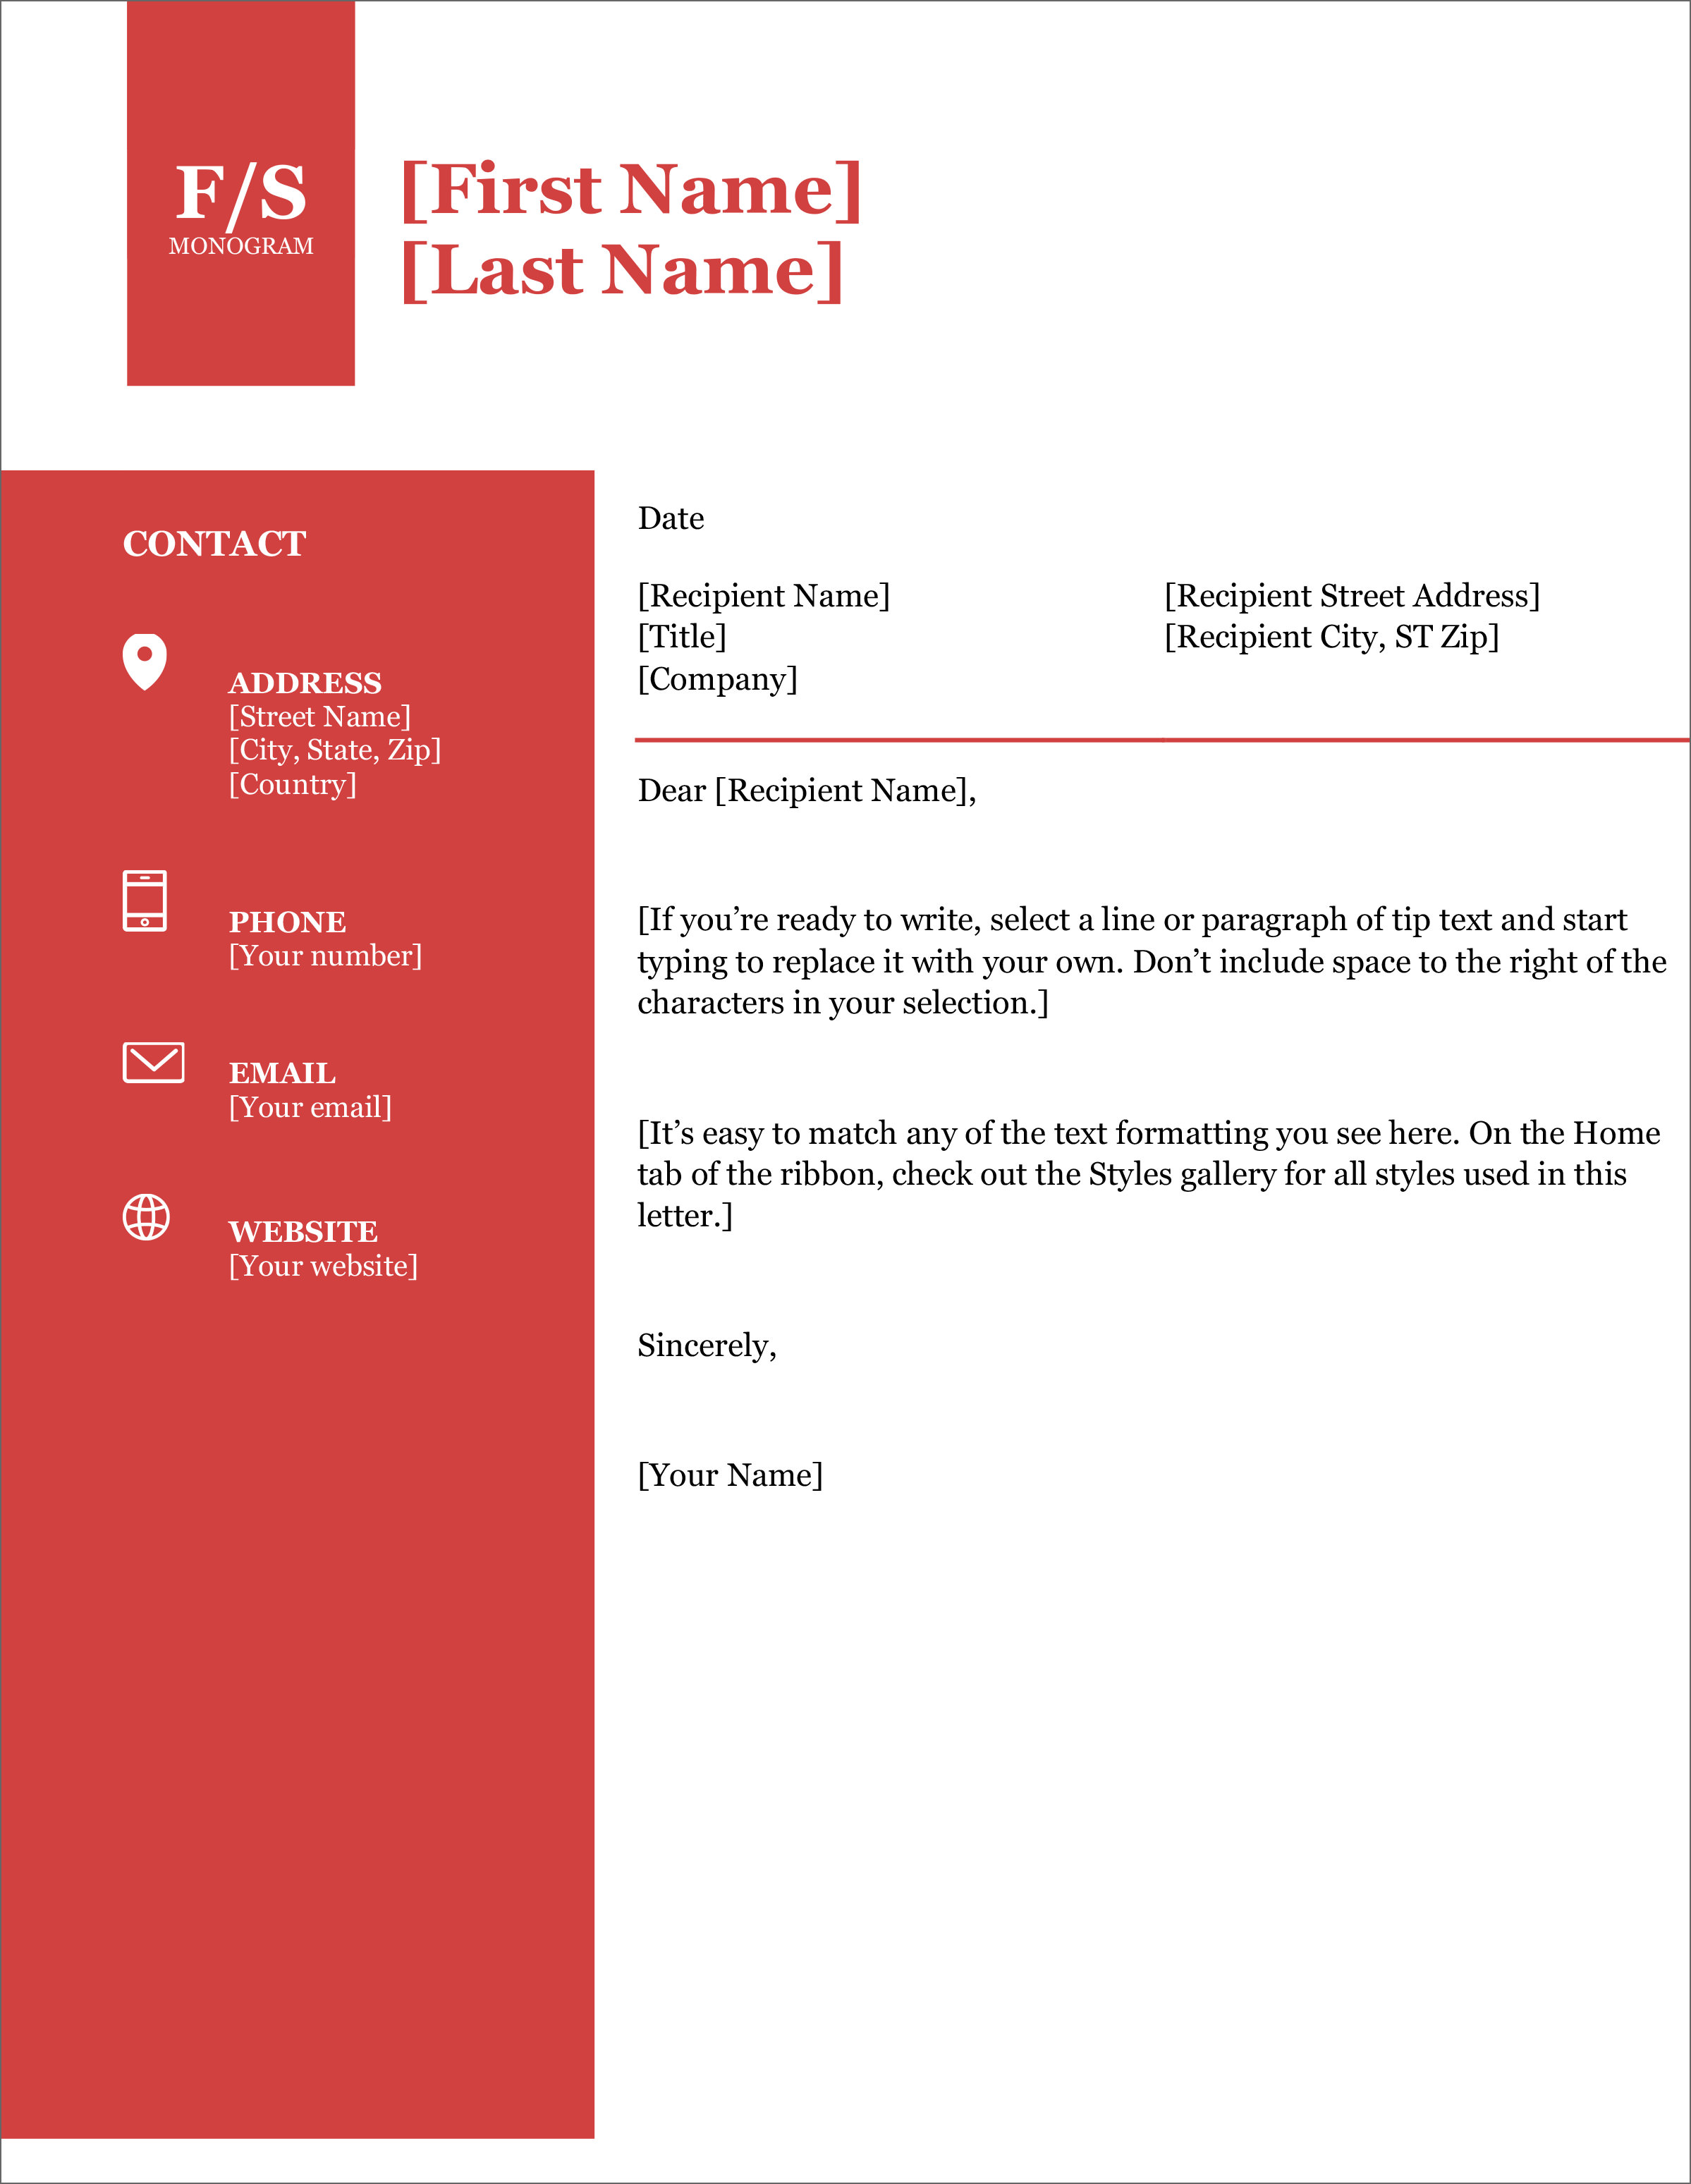 microsoft office word templates free download